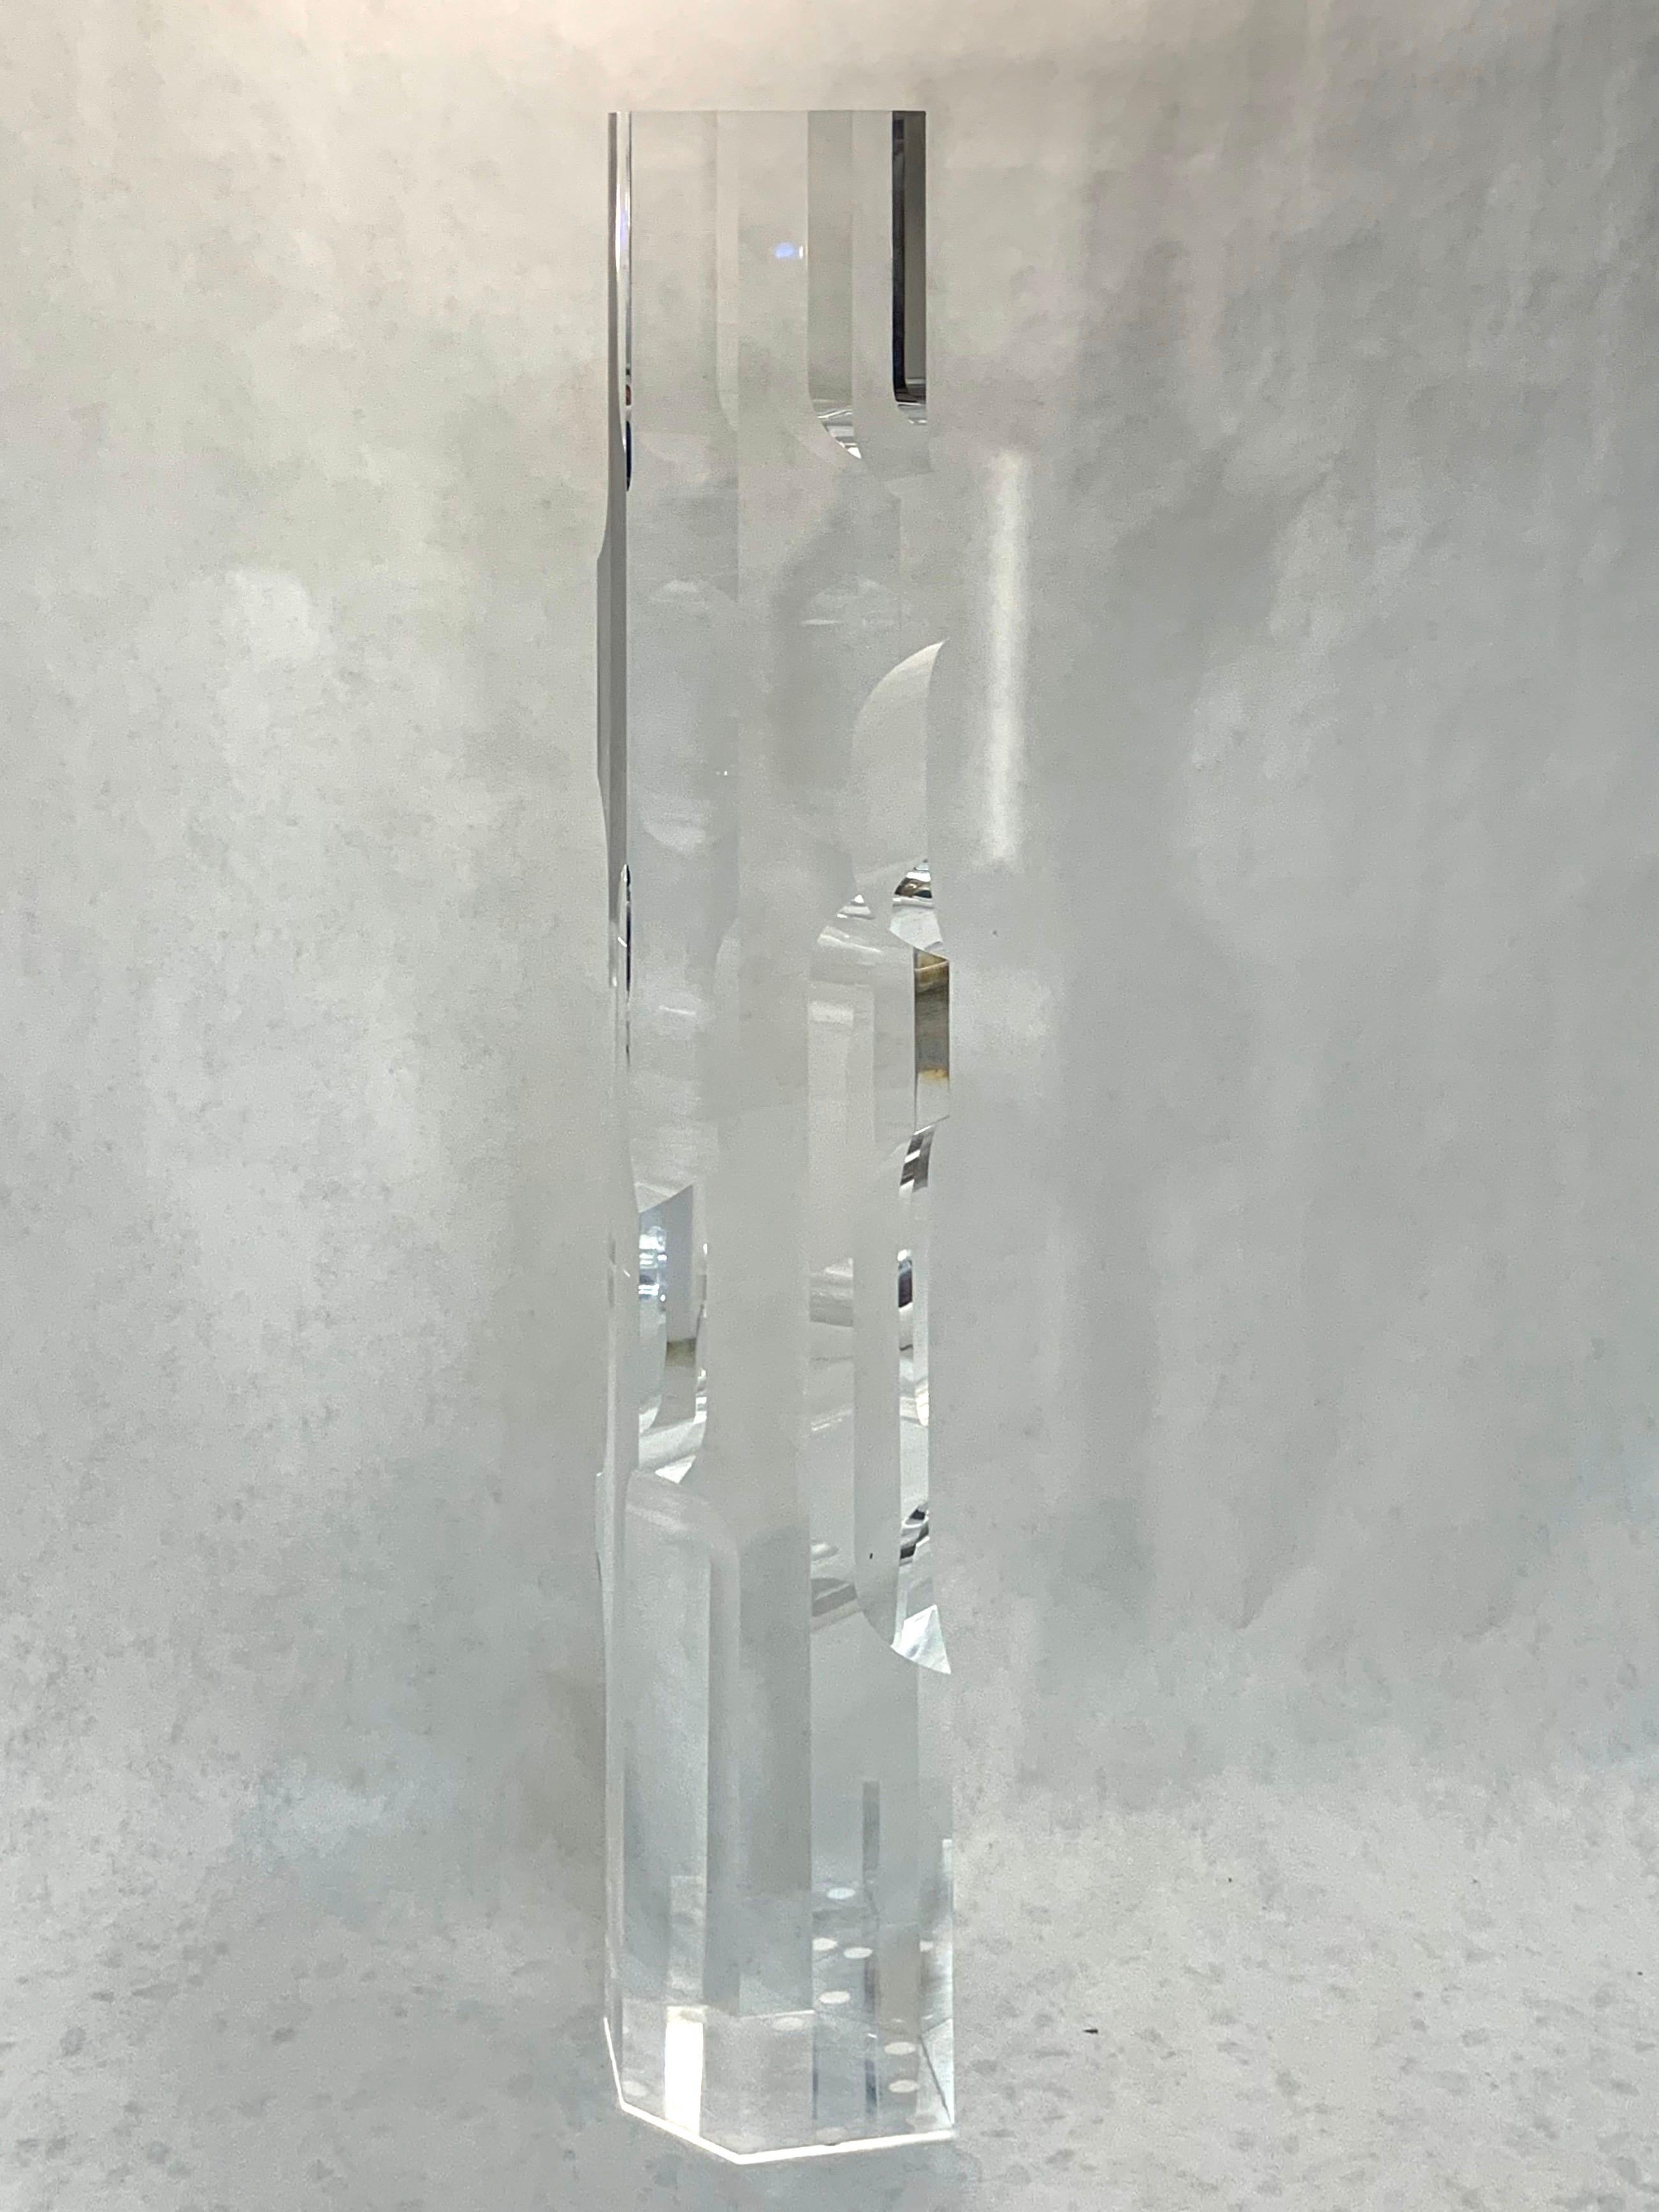 Acrylic Alessio Tasca Italian Modern Abstract Lucite 'Fusina' Prism Sculpture